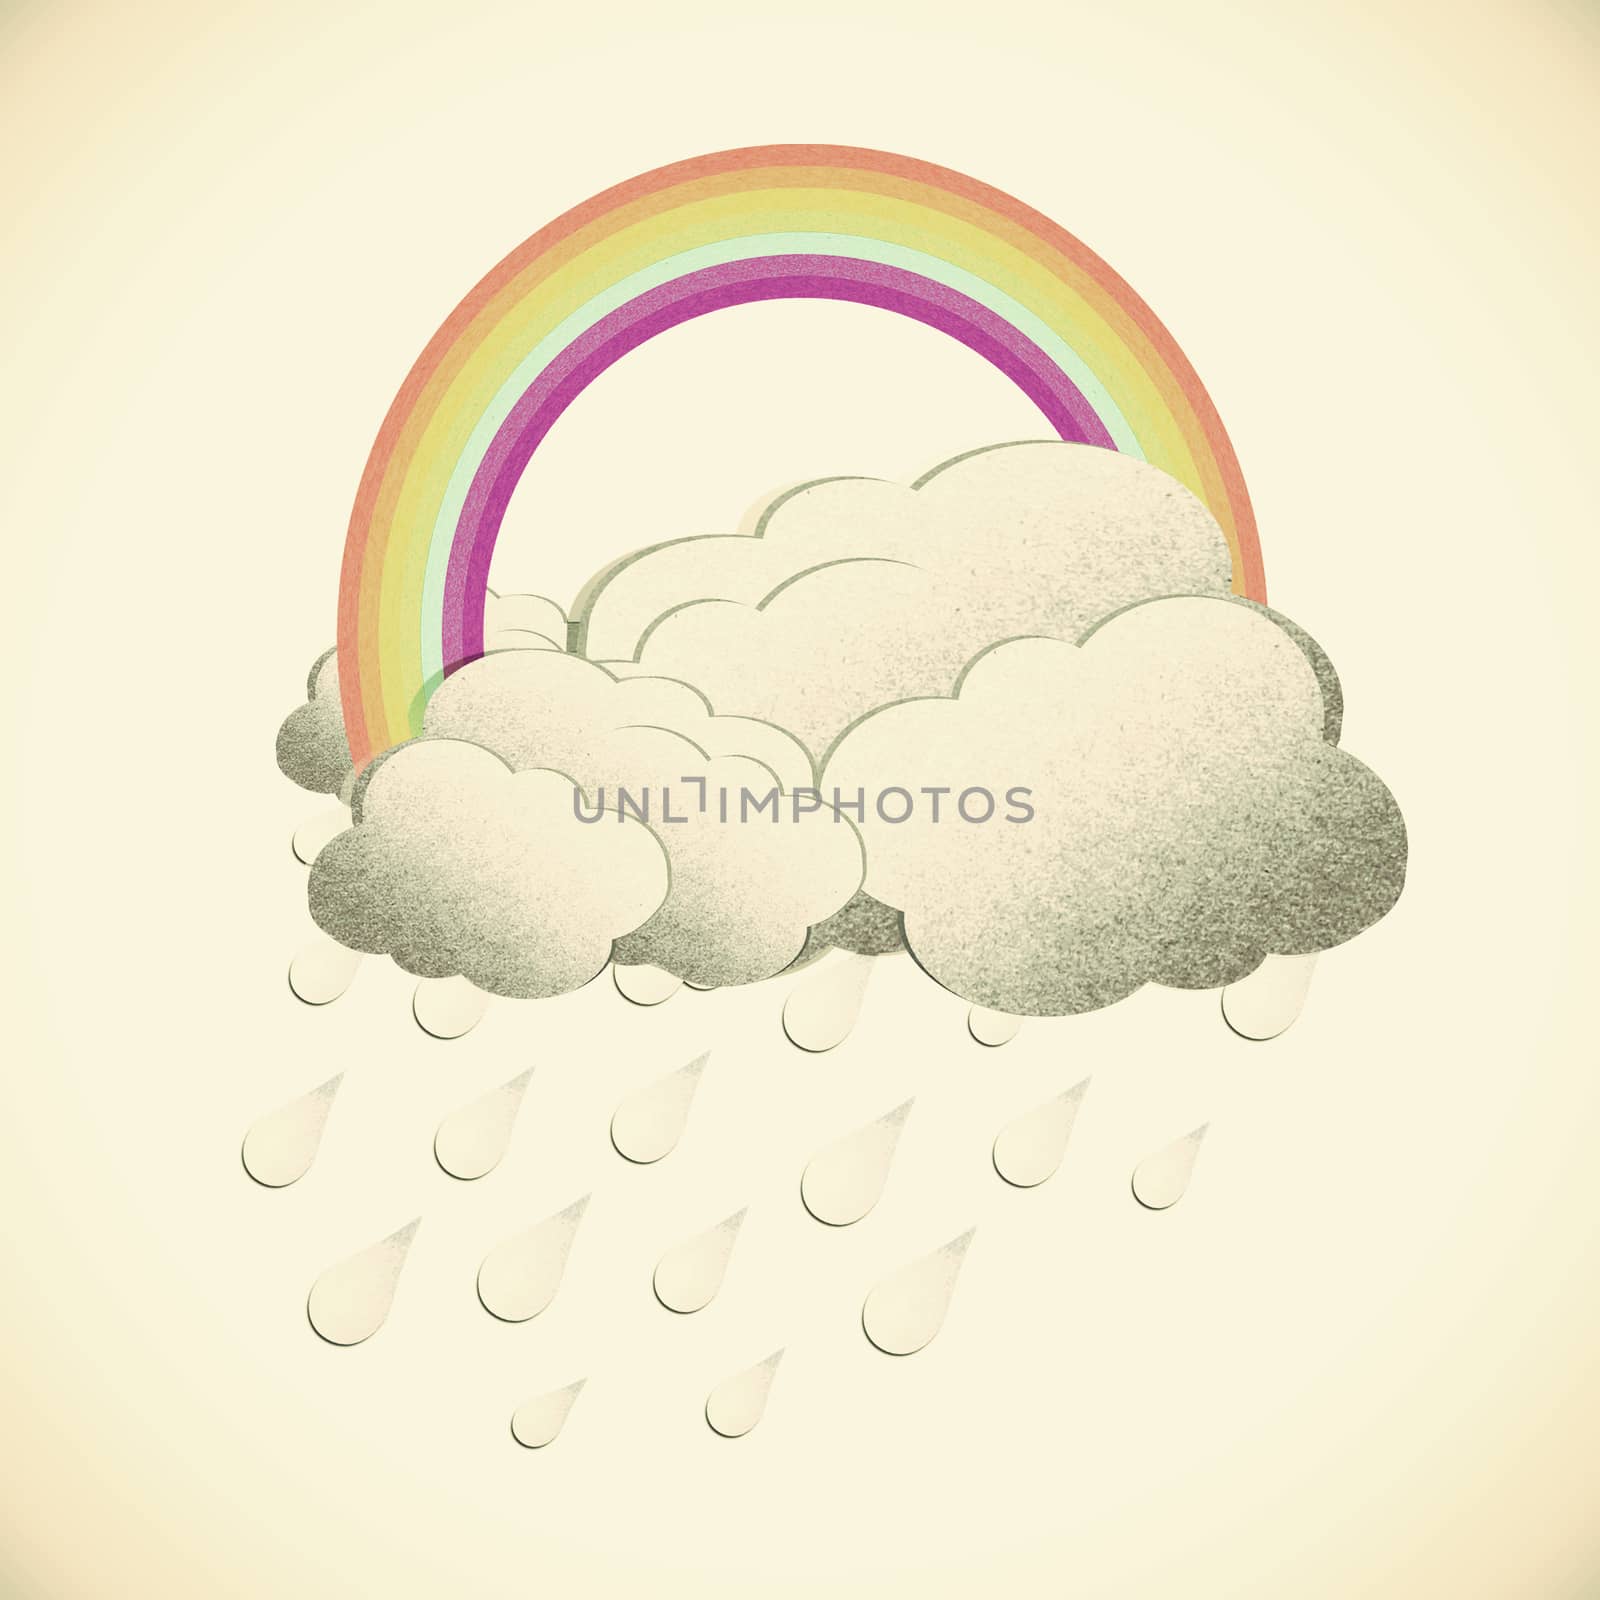  Grunge recycled paper rainbow with rain on vintage tone background